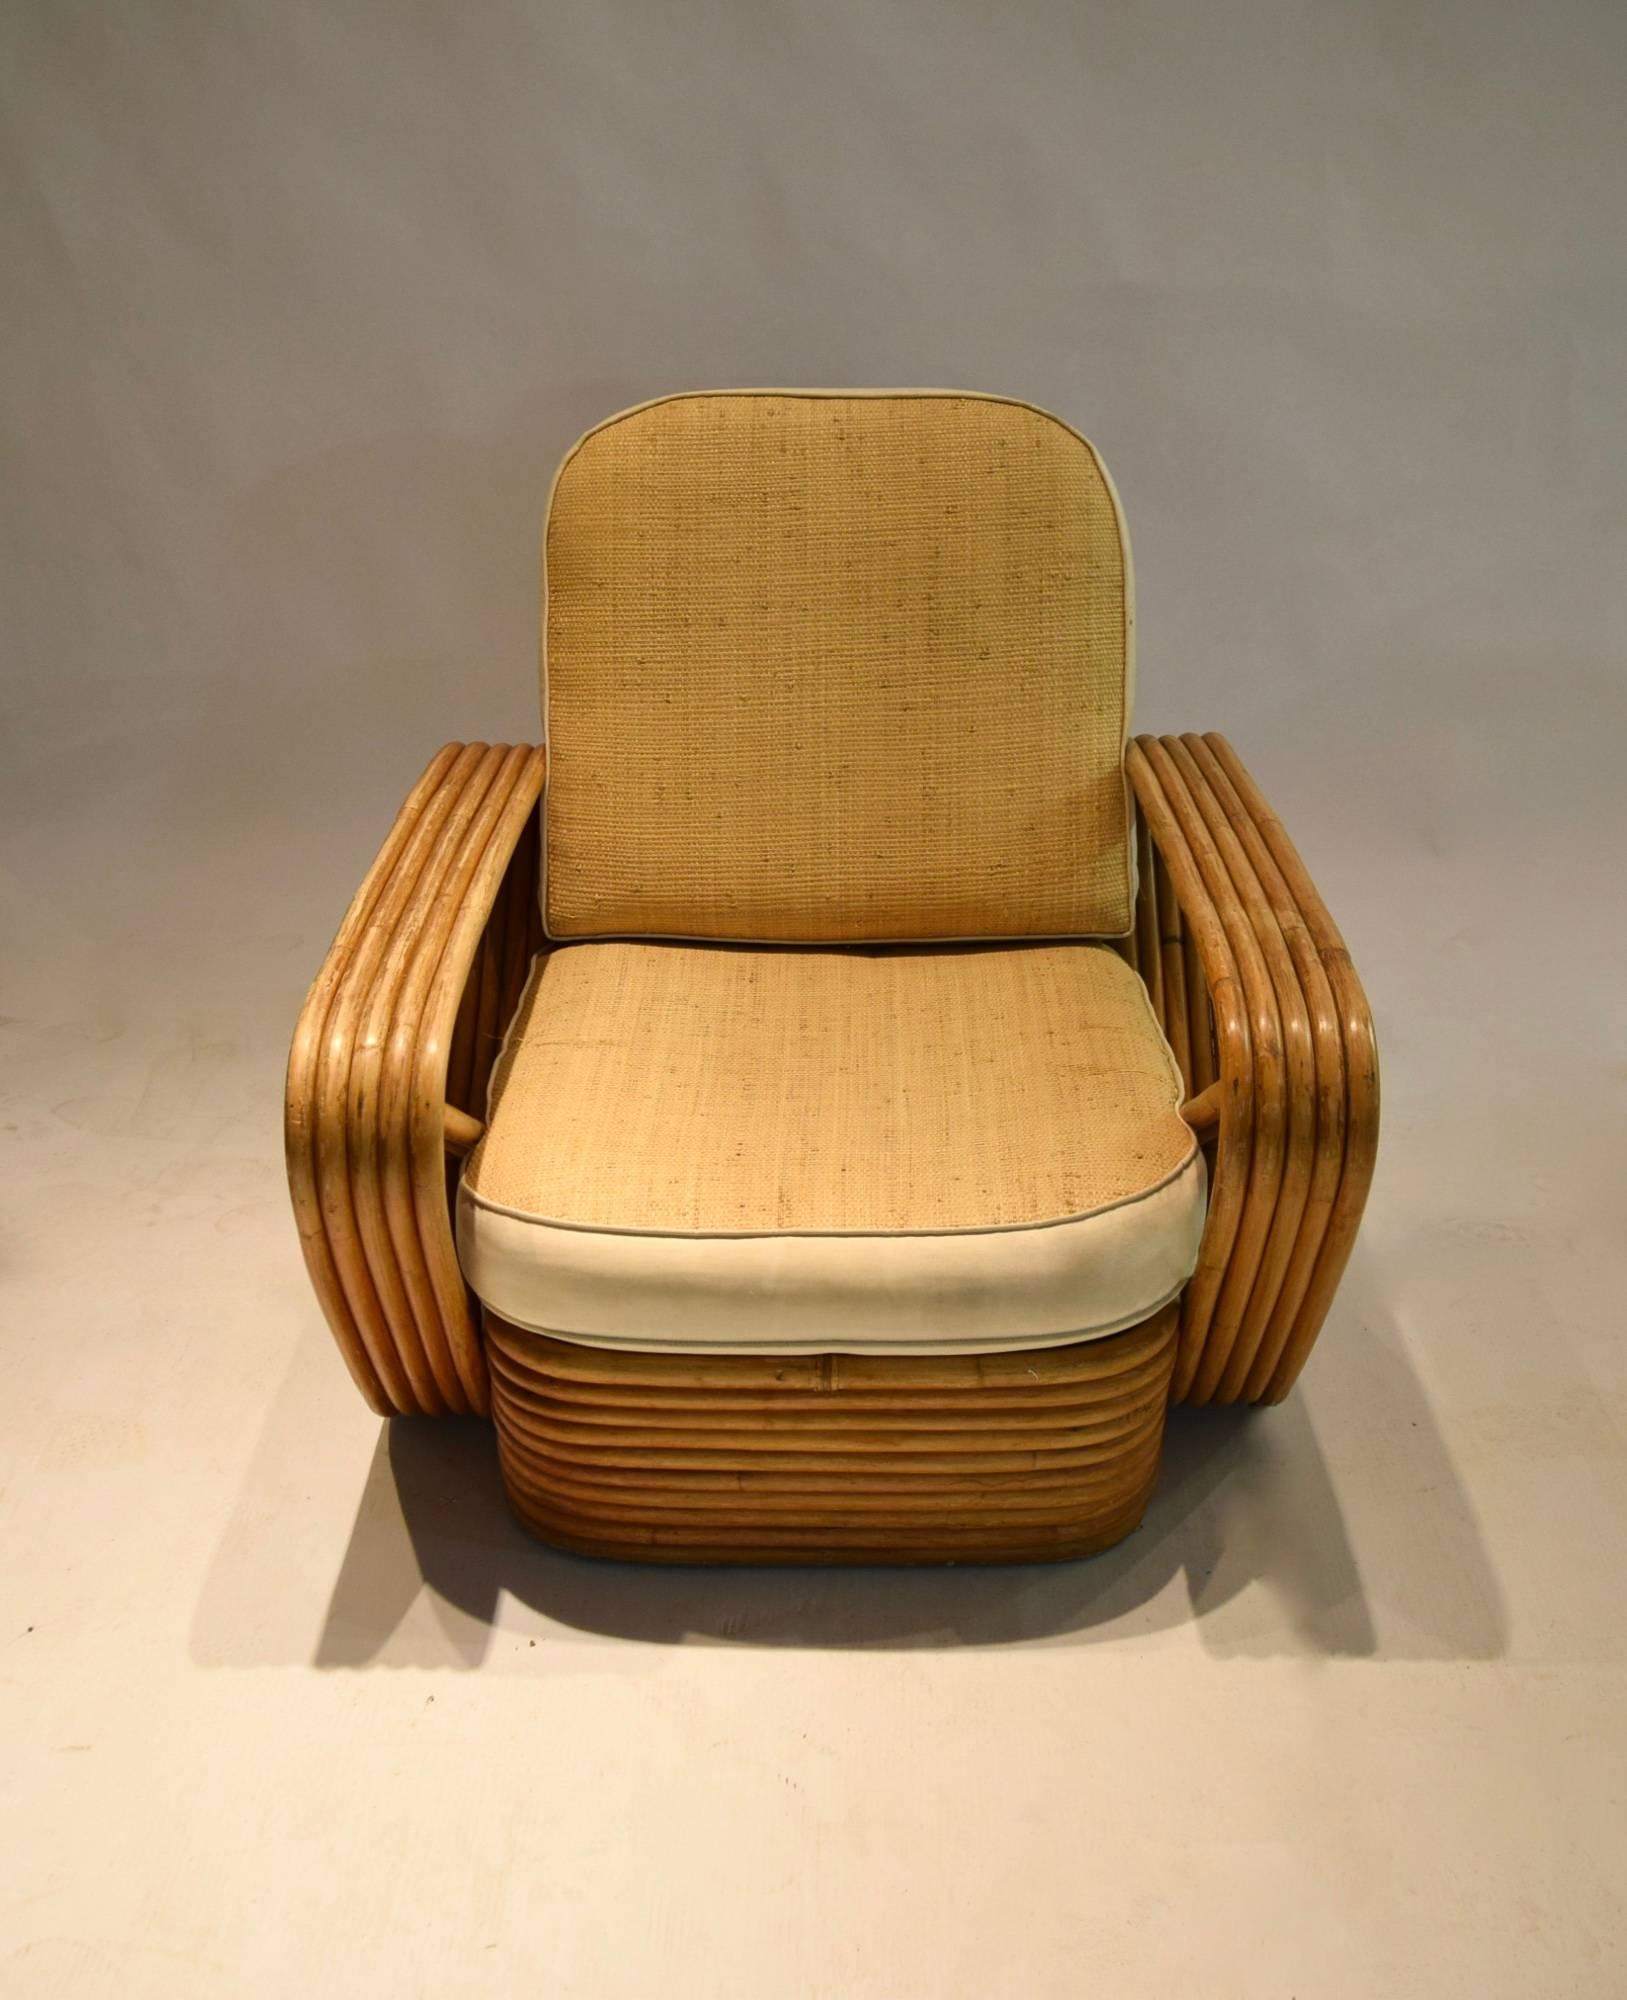 Pair of 5-reed lounge armchairs in very good, original condition with no structural damages, seat and back cushions upholstered in straw woven fabric with bordering and welting in muslin. 
Arm height: 50 cm/19.7